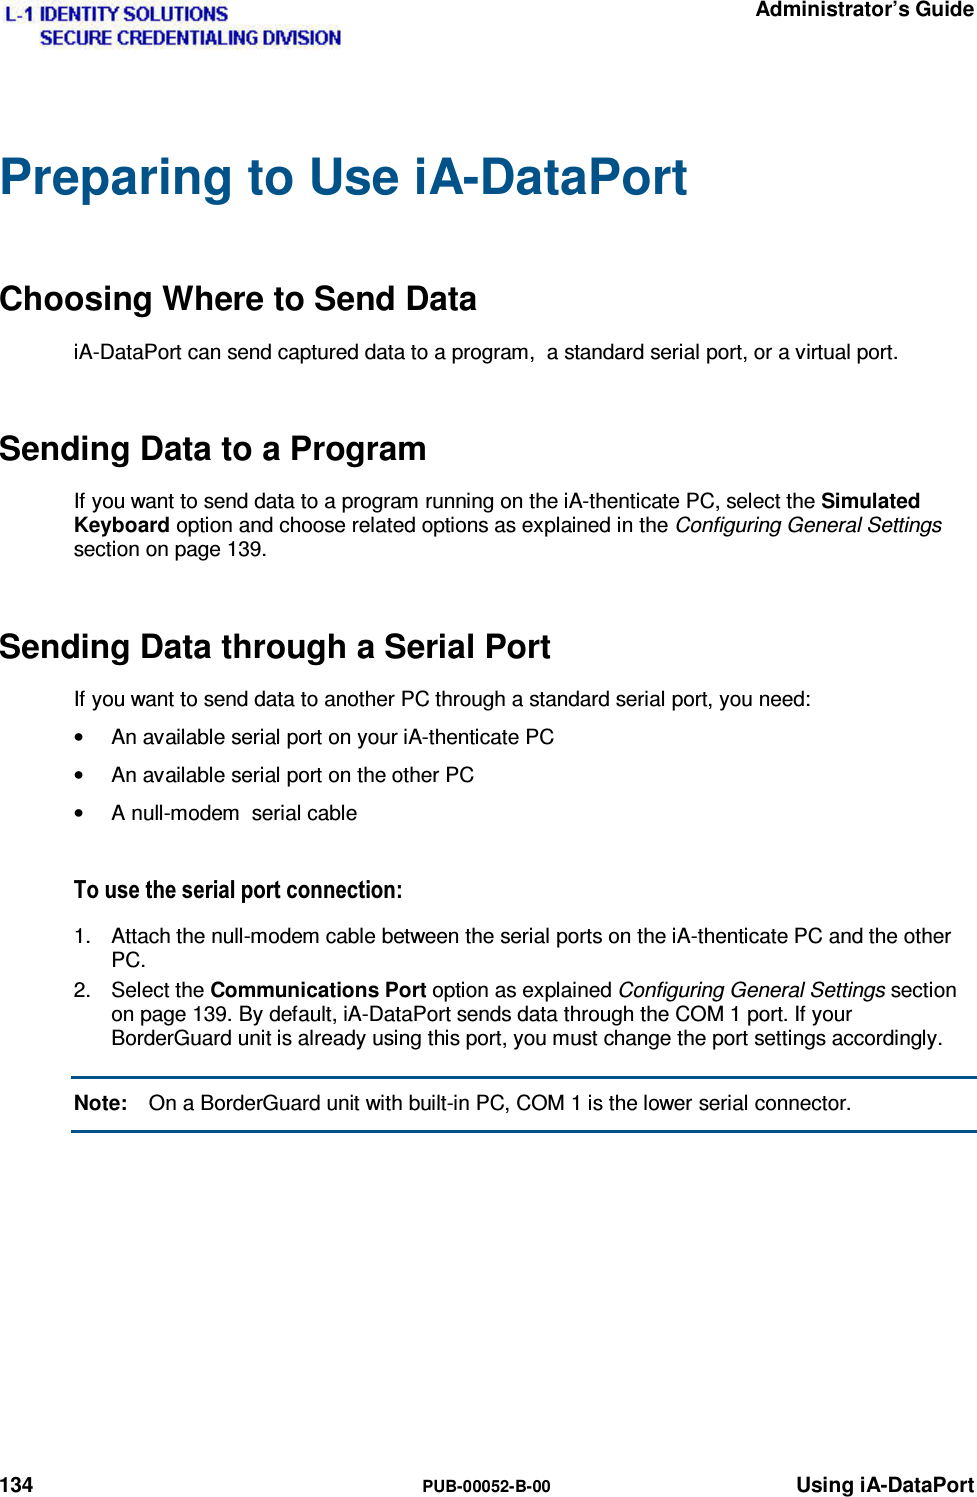   Administrator’s Guide 134  PUB-00052-B-00 Using iA-DataPort Preparing to Use iA-DataPort Choosing Where to Send Data iA-DataPort can send captured data to a program,  a standard serial port, or a virtual port. Sending Data to a Program If you want to send data to a program running on the iA-thenticate PC, select the Simulated Keyboard option and choose related options as explained in the Configuring General Settings section on page 139. Sending Data through a Serial Port If you want to send data to another PC through a standard serial port, you need: •  An available serial port on your iA-thenticate PC •  An available serial port on the other PC •  A null-modem  serial cable 7RXVHWKHVHULDOSRUWFRQQHFWLRQ1.  Attach the null-modem cable between the serial ports on the iA-thenticate PC and the other PC. 2. Select the Communications Port option as explained Configuring General Settings section on page 139. By default, iA-DataPort sends data through the COM 1 port. If your BorderGuard unit is already using this port, you must change the port settings accordingly. Note:  On a BorderGuard unit with built-in PC, COM 1 is the lower serial connector.    